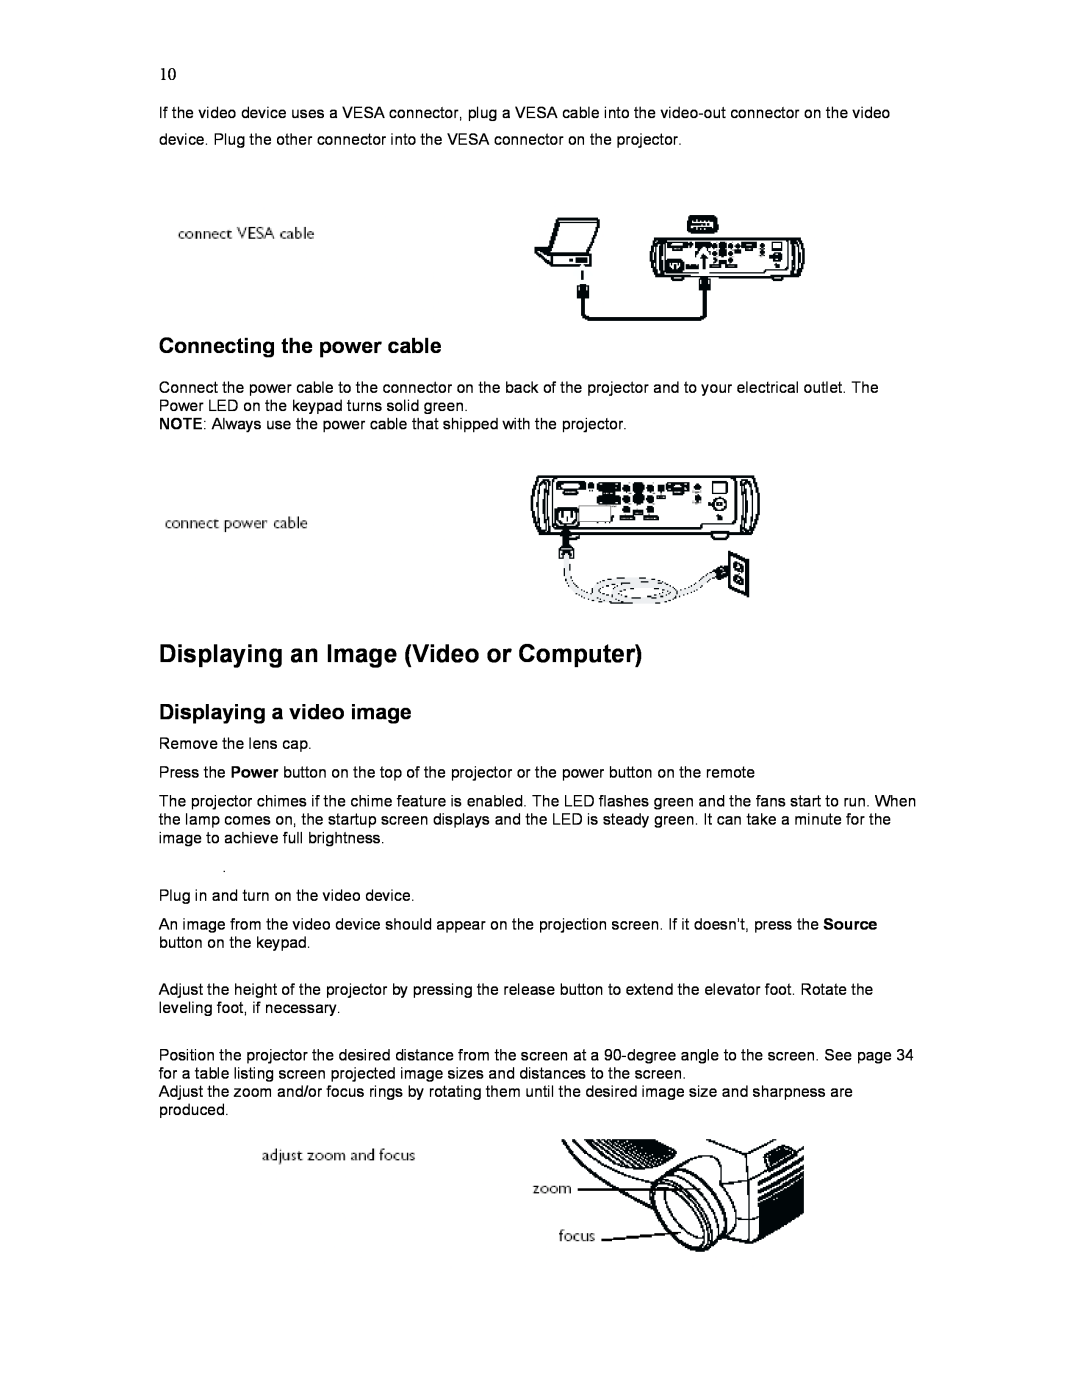 Knoll Systems HD177 user manual Displaying an Image Video or Computer, Connecting the power cable, Displaying a video image 